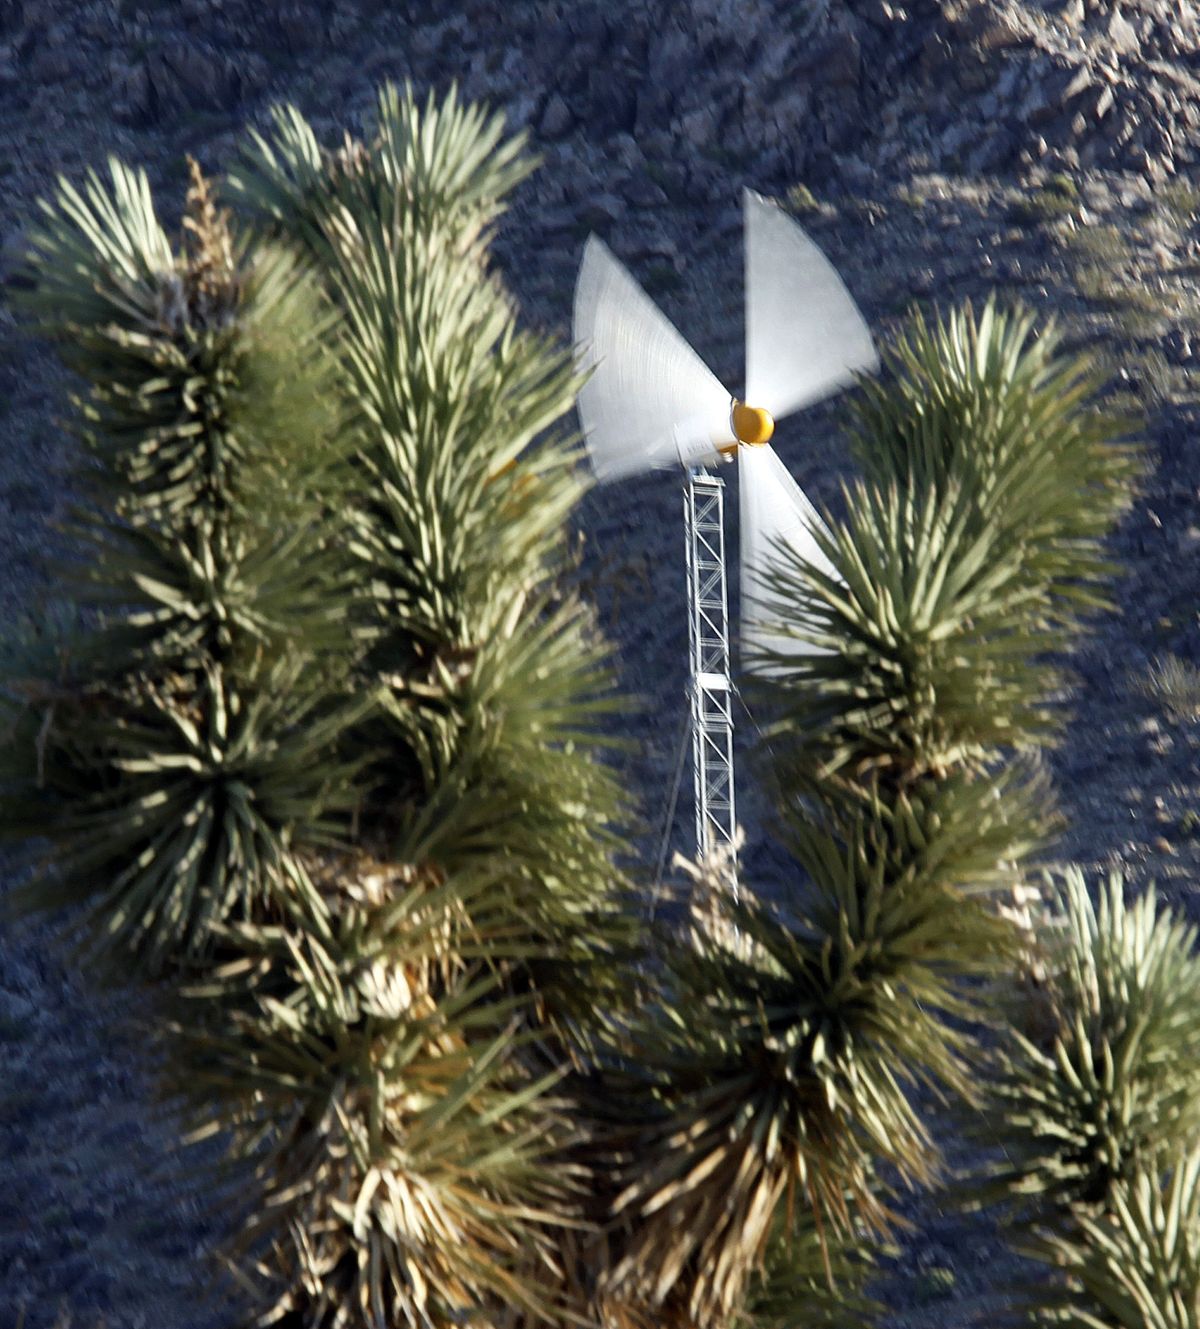 A wind-driven turbine drives an electrical generator on private property near a site proposed for wind turbines to generate electricity, in the Mojave Desert near the town of Apple Valley, Calif.  (Associated Press)